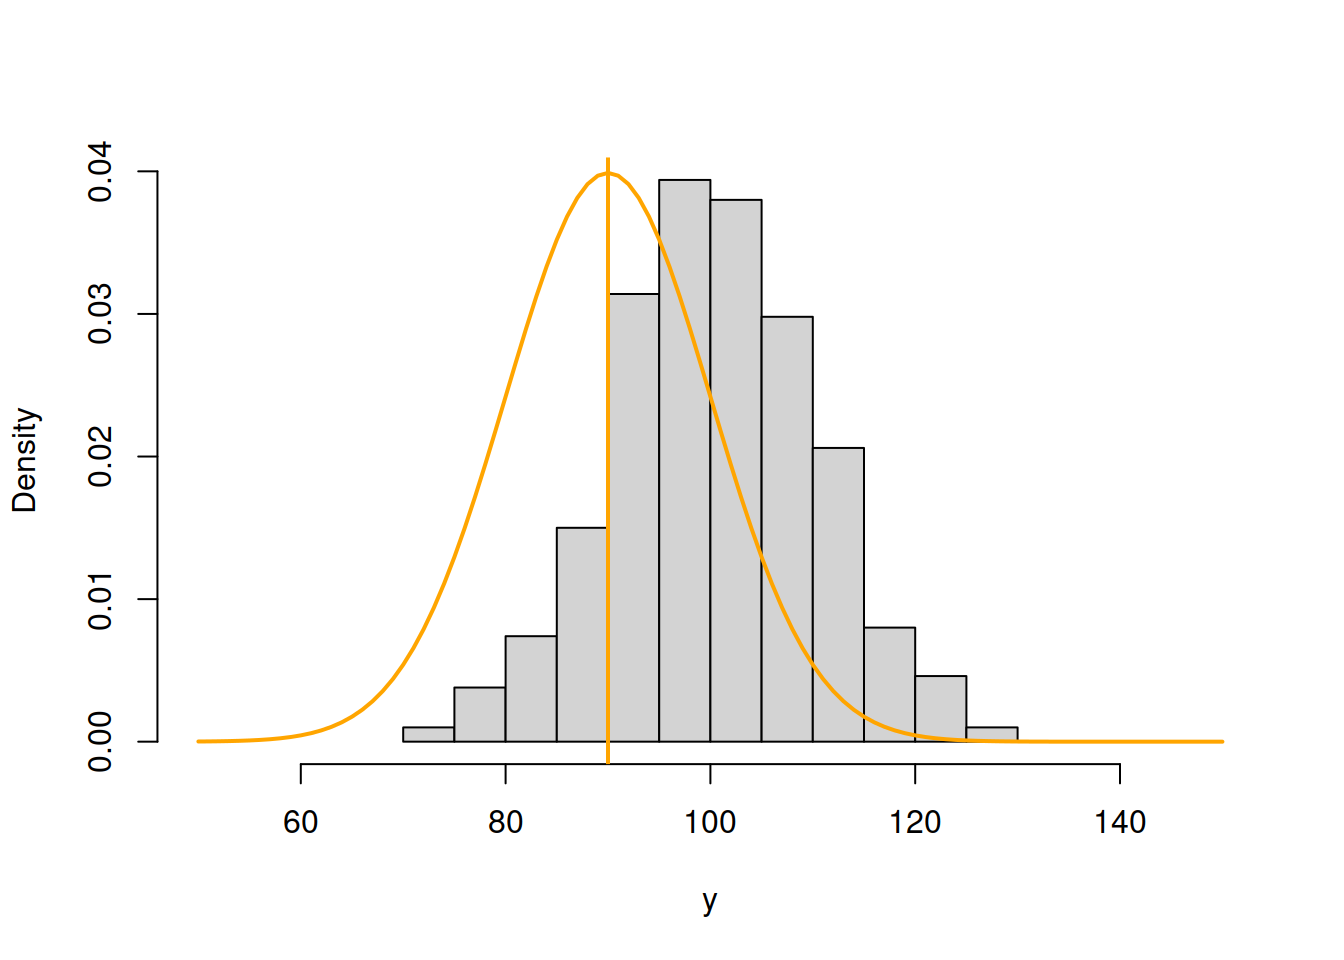 ML example with Normal curve and $\hat{\mu}_y=90$ and $\hat{\sigma}=10$